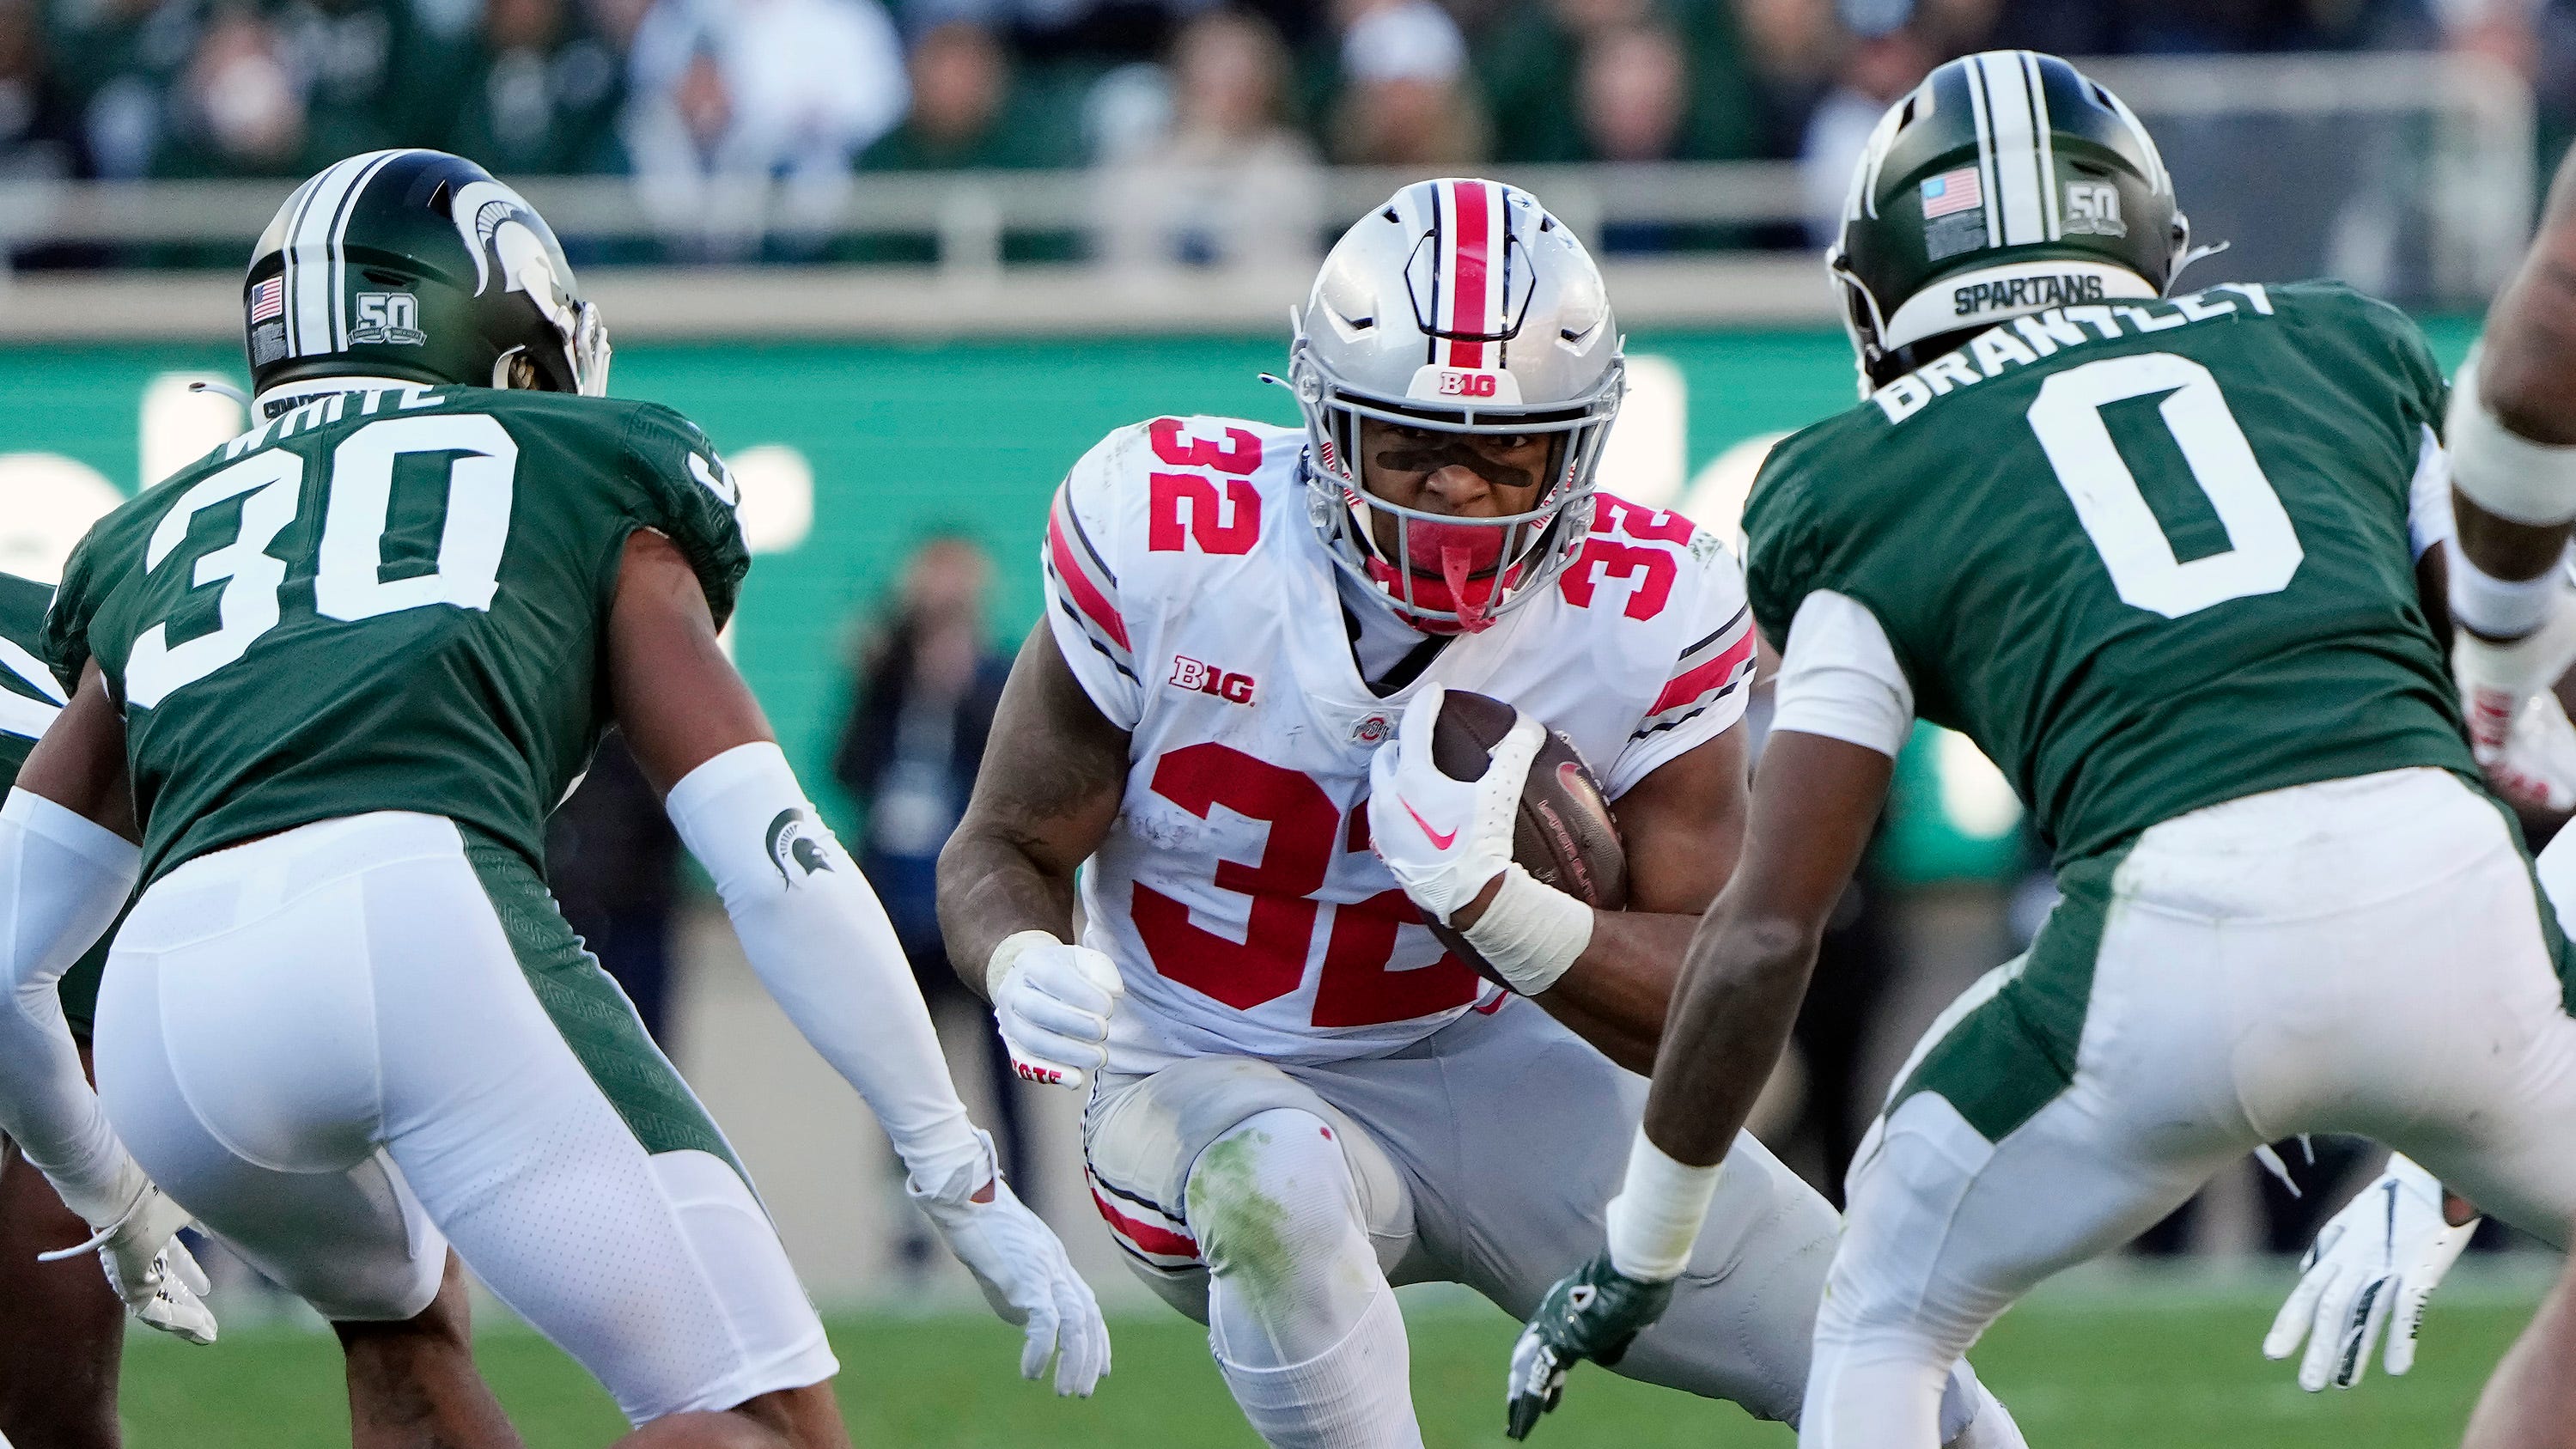 Ohio State football a big favorite over Northwestern, but weather likely to be a factor